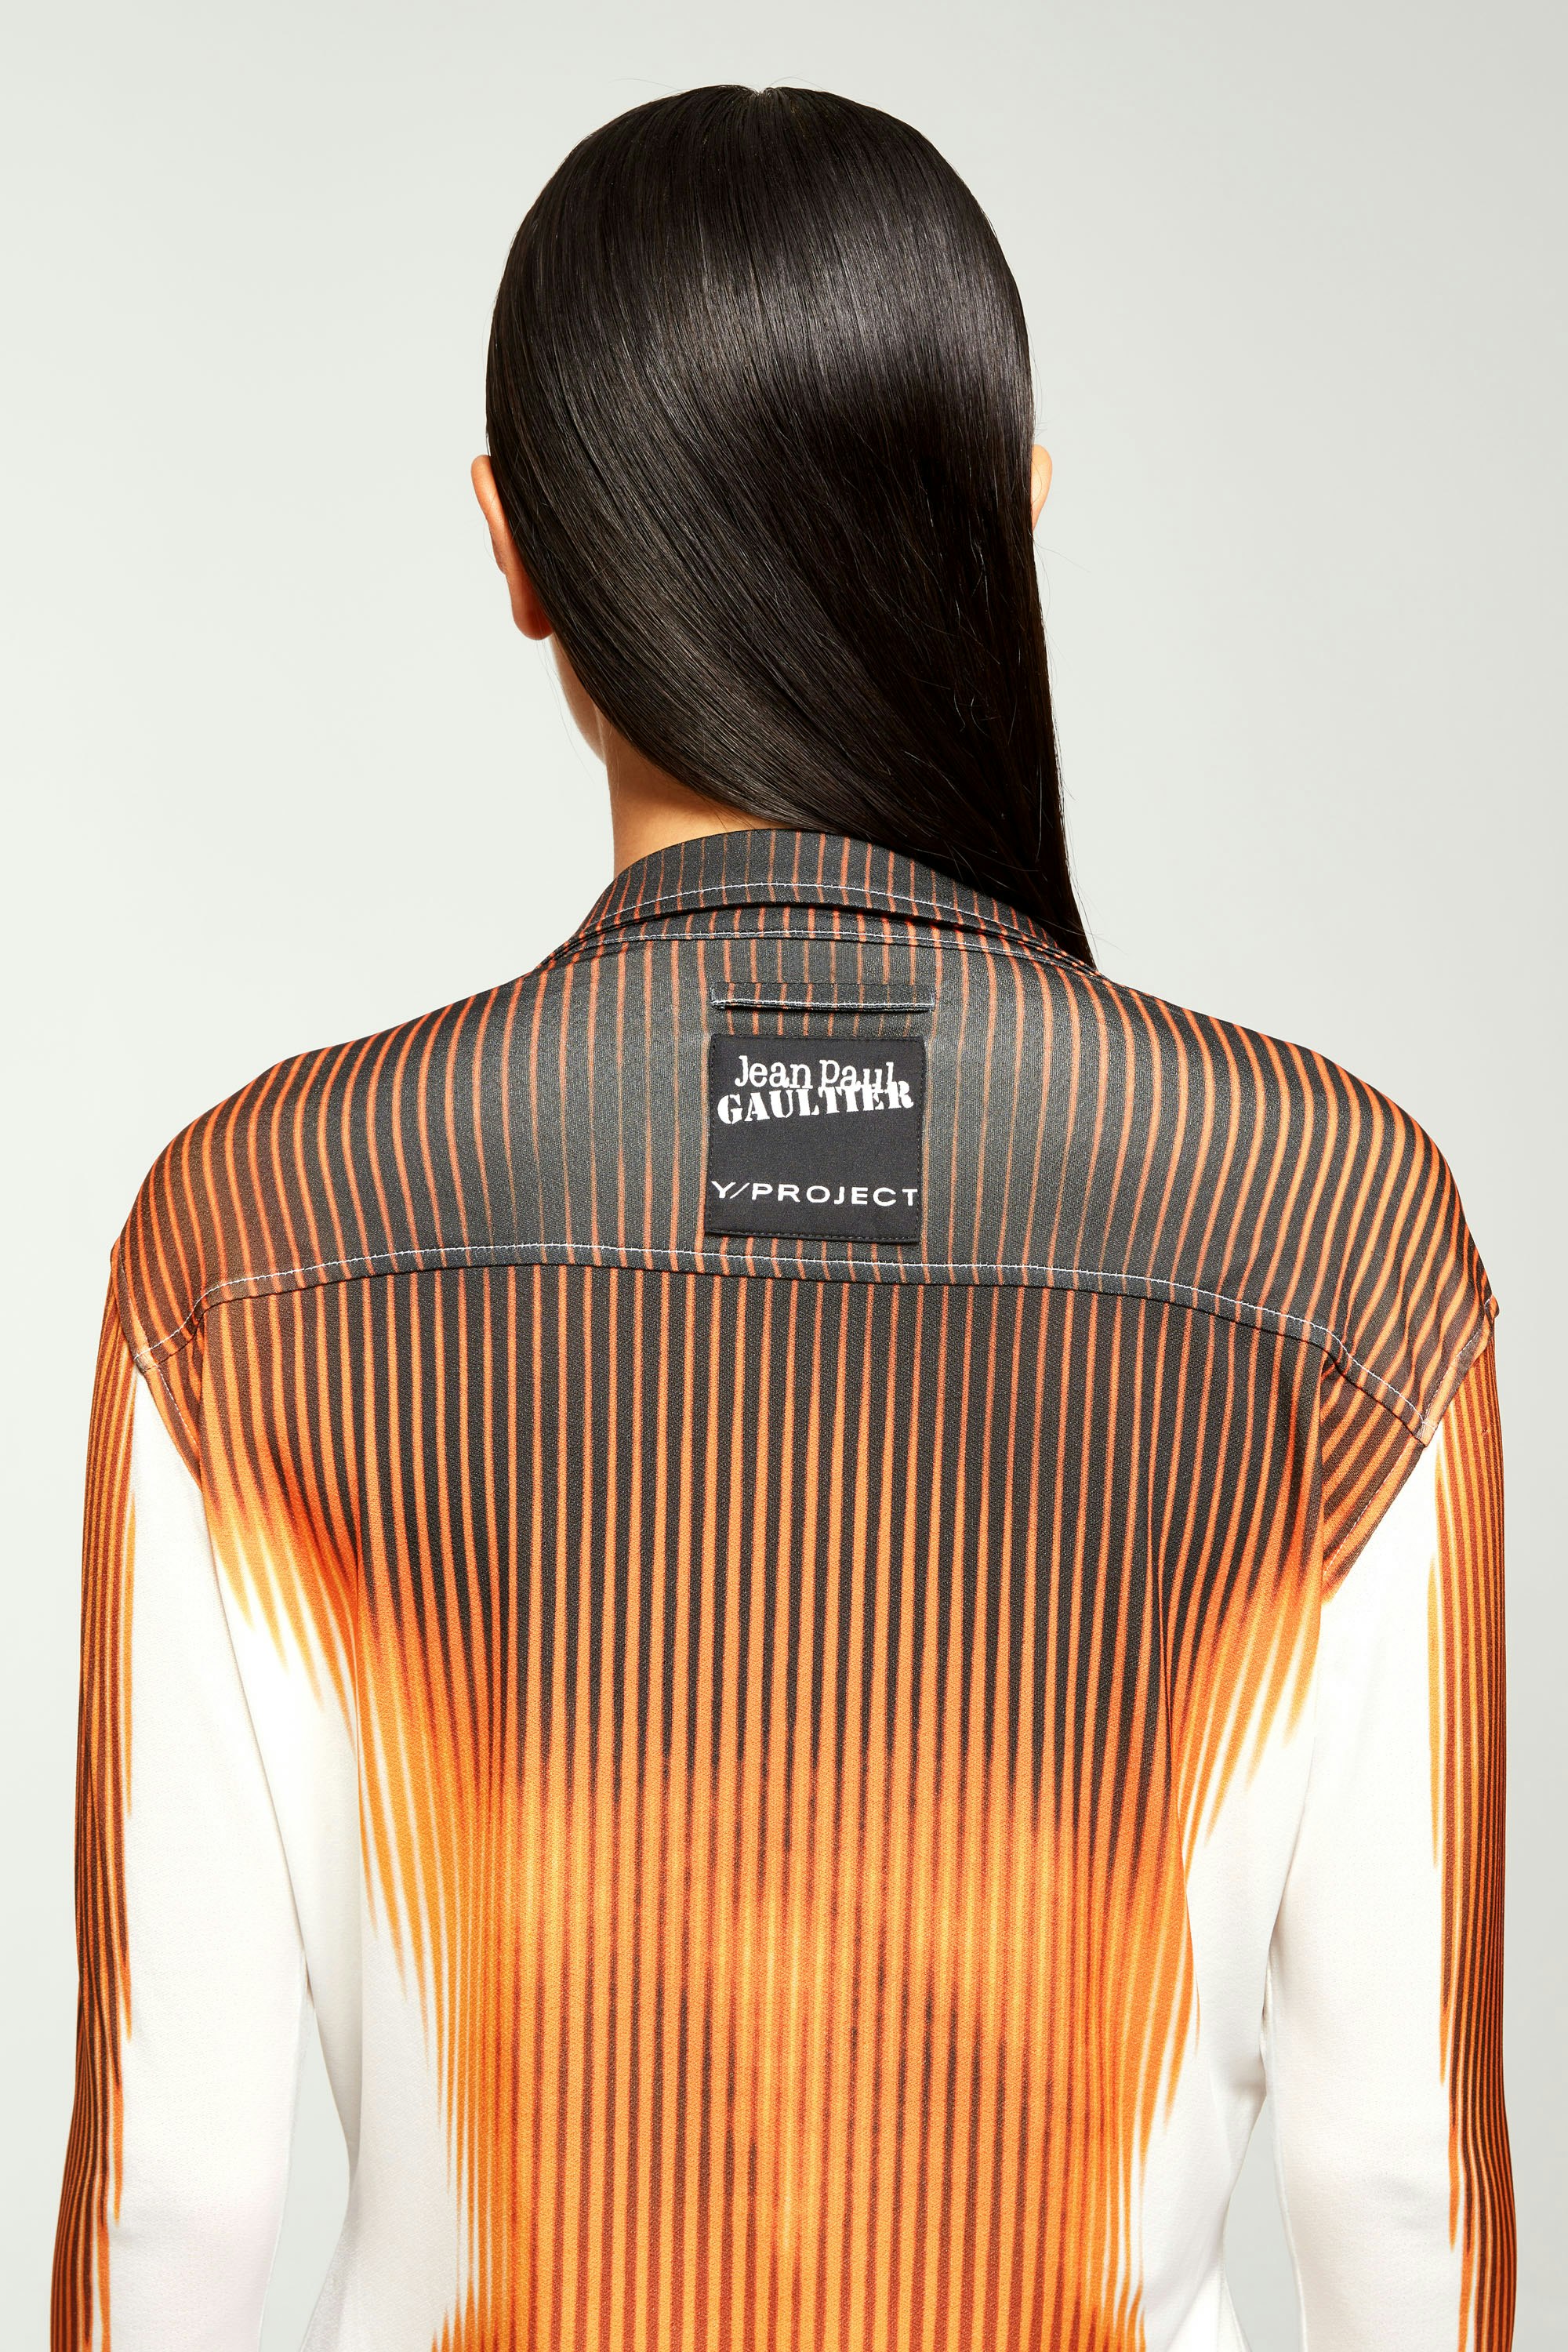 The White & Orange Body Morph Shirt by Jean Paul Gaultier x Y/Project